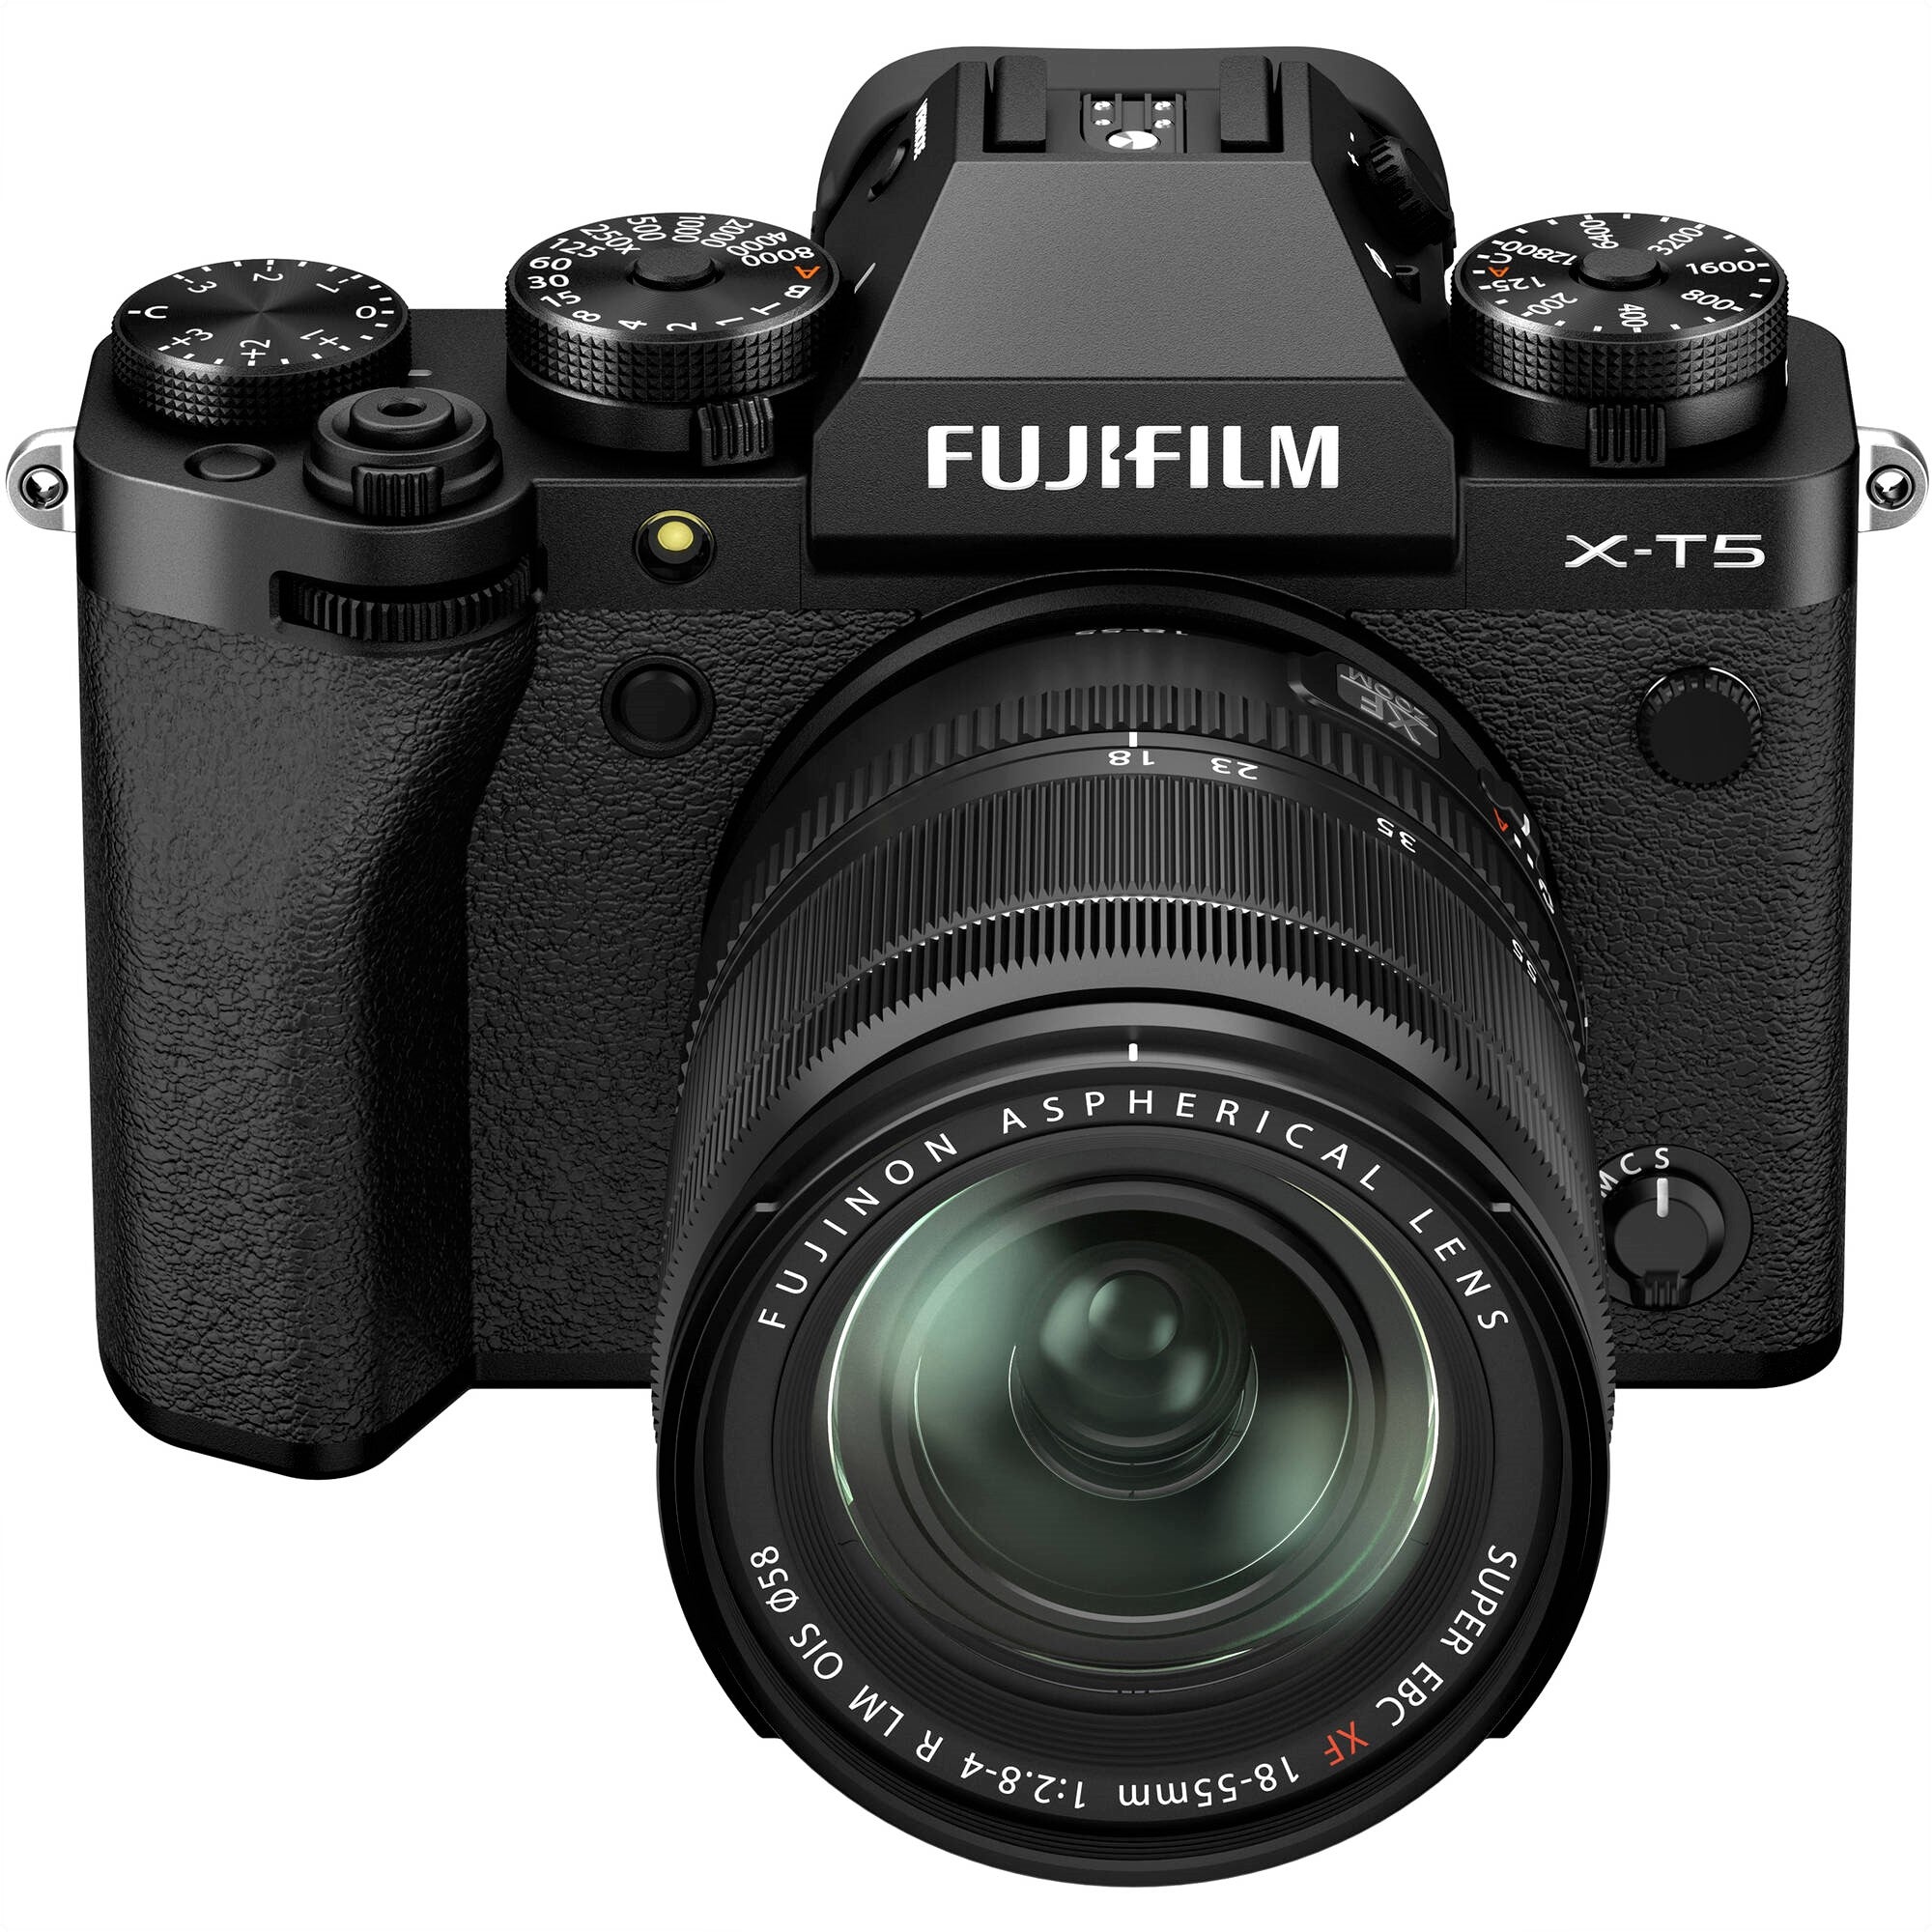 Fujifilm X-T5 Mirrorless Camera with 18-55mm Lens (Black) in a distant view